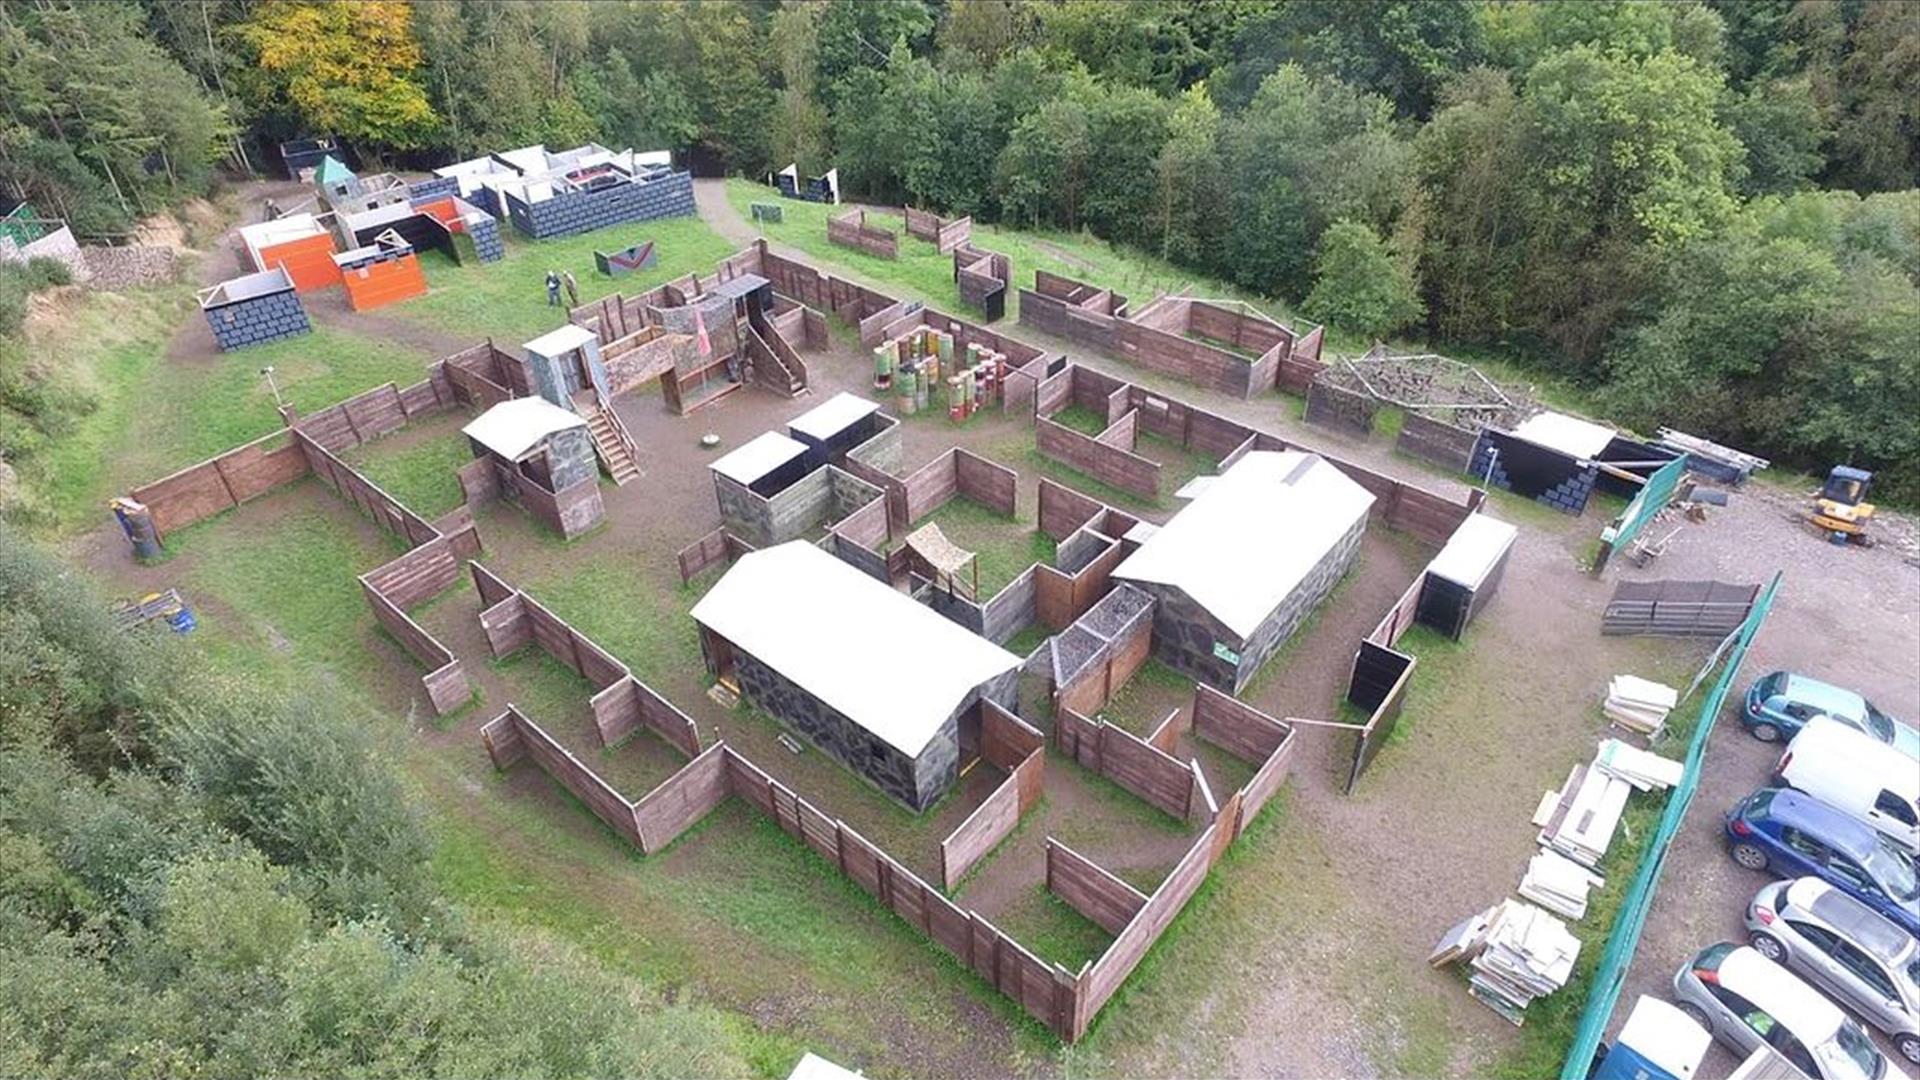 Image of the airsoft arena